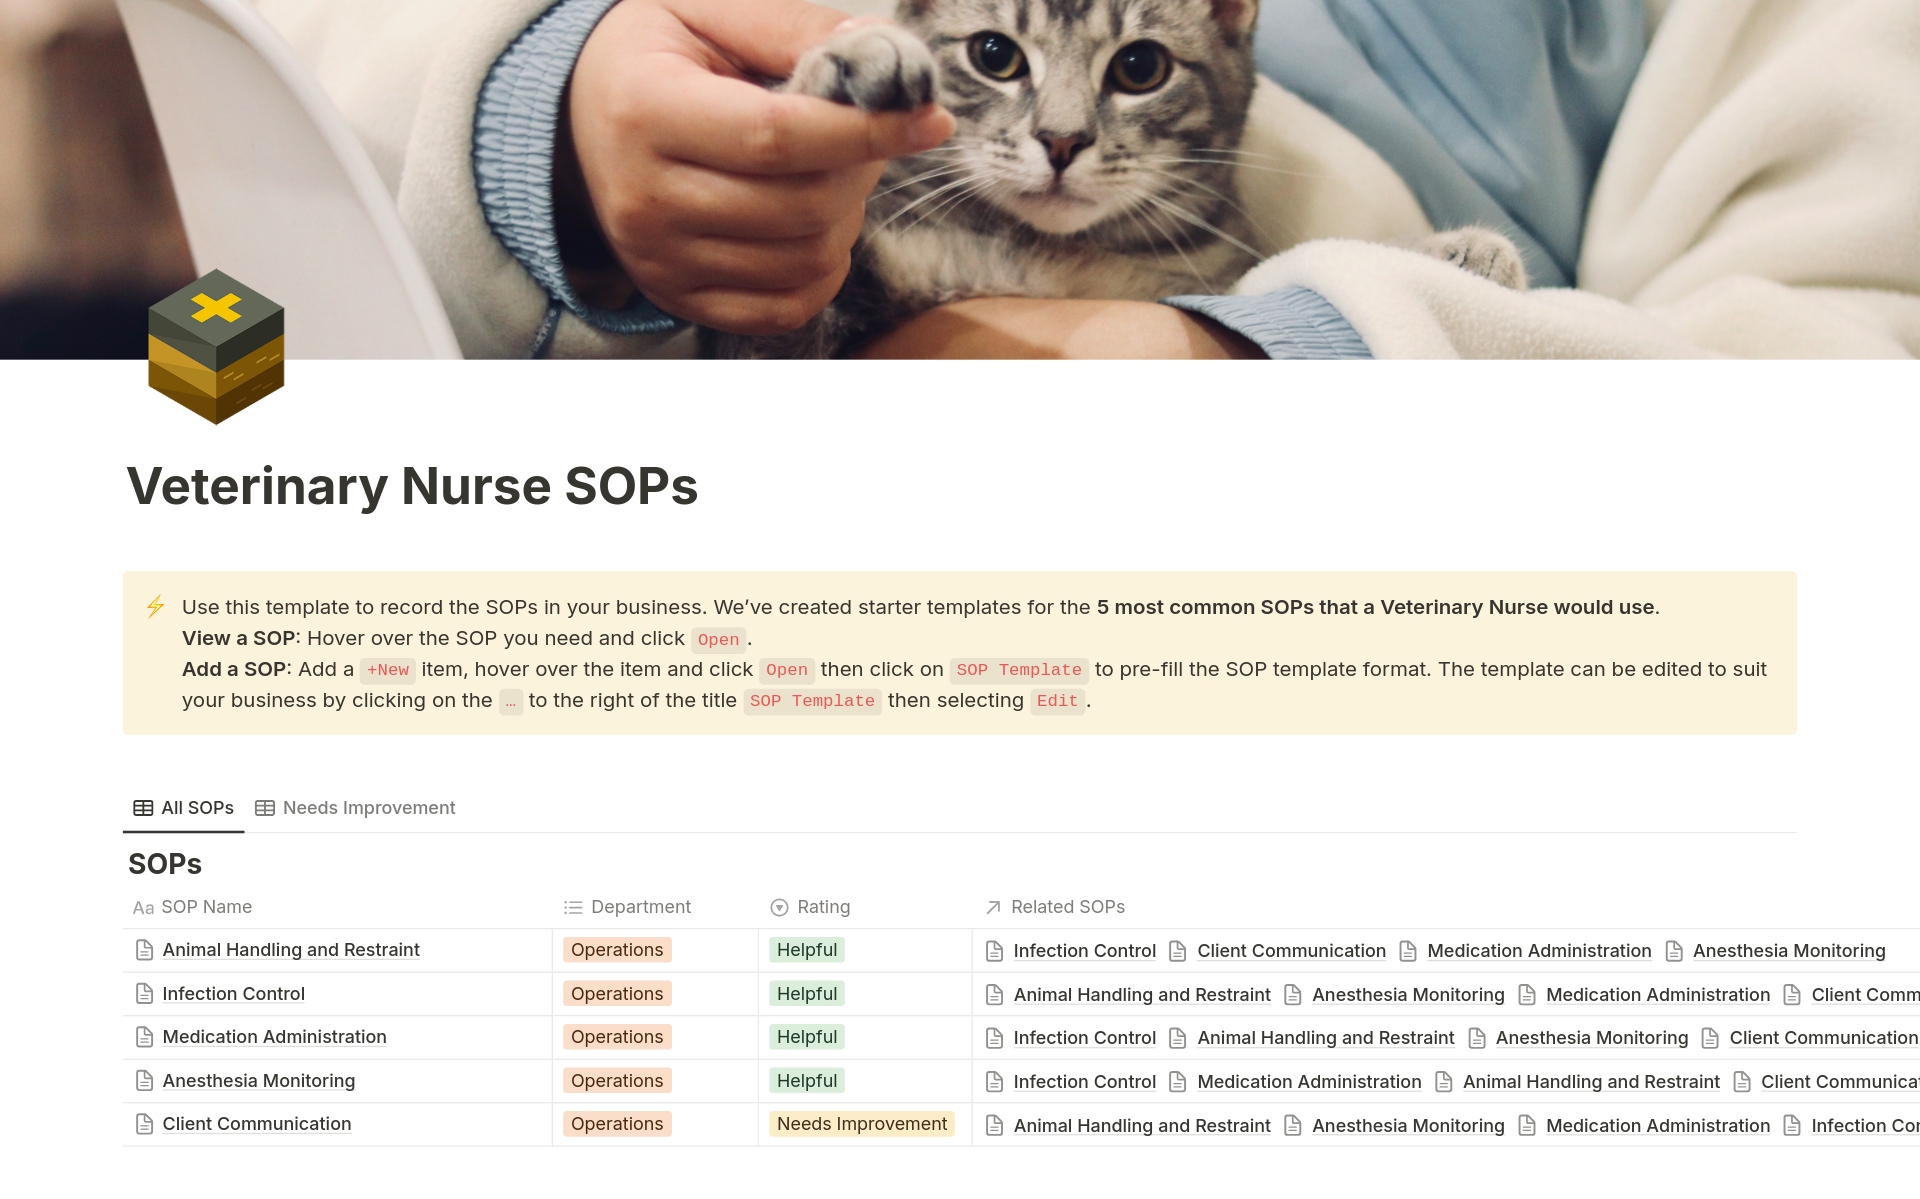 These Standard Operating Procedures (SOPs) provide guidelines for veterinary nurses on proper animal handling and restraint techniques, infection control and more. Save 10 hours of research.